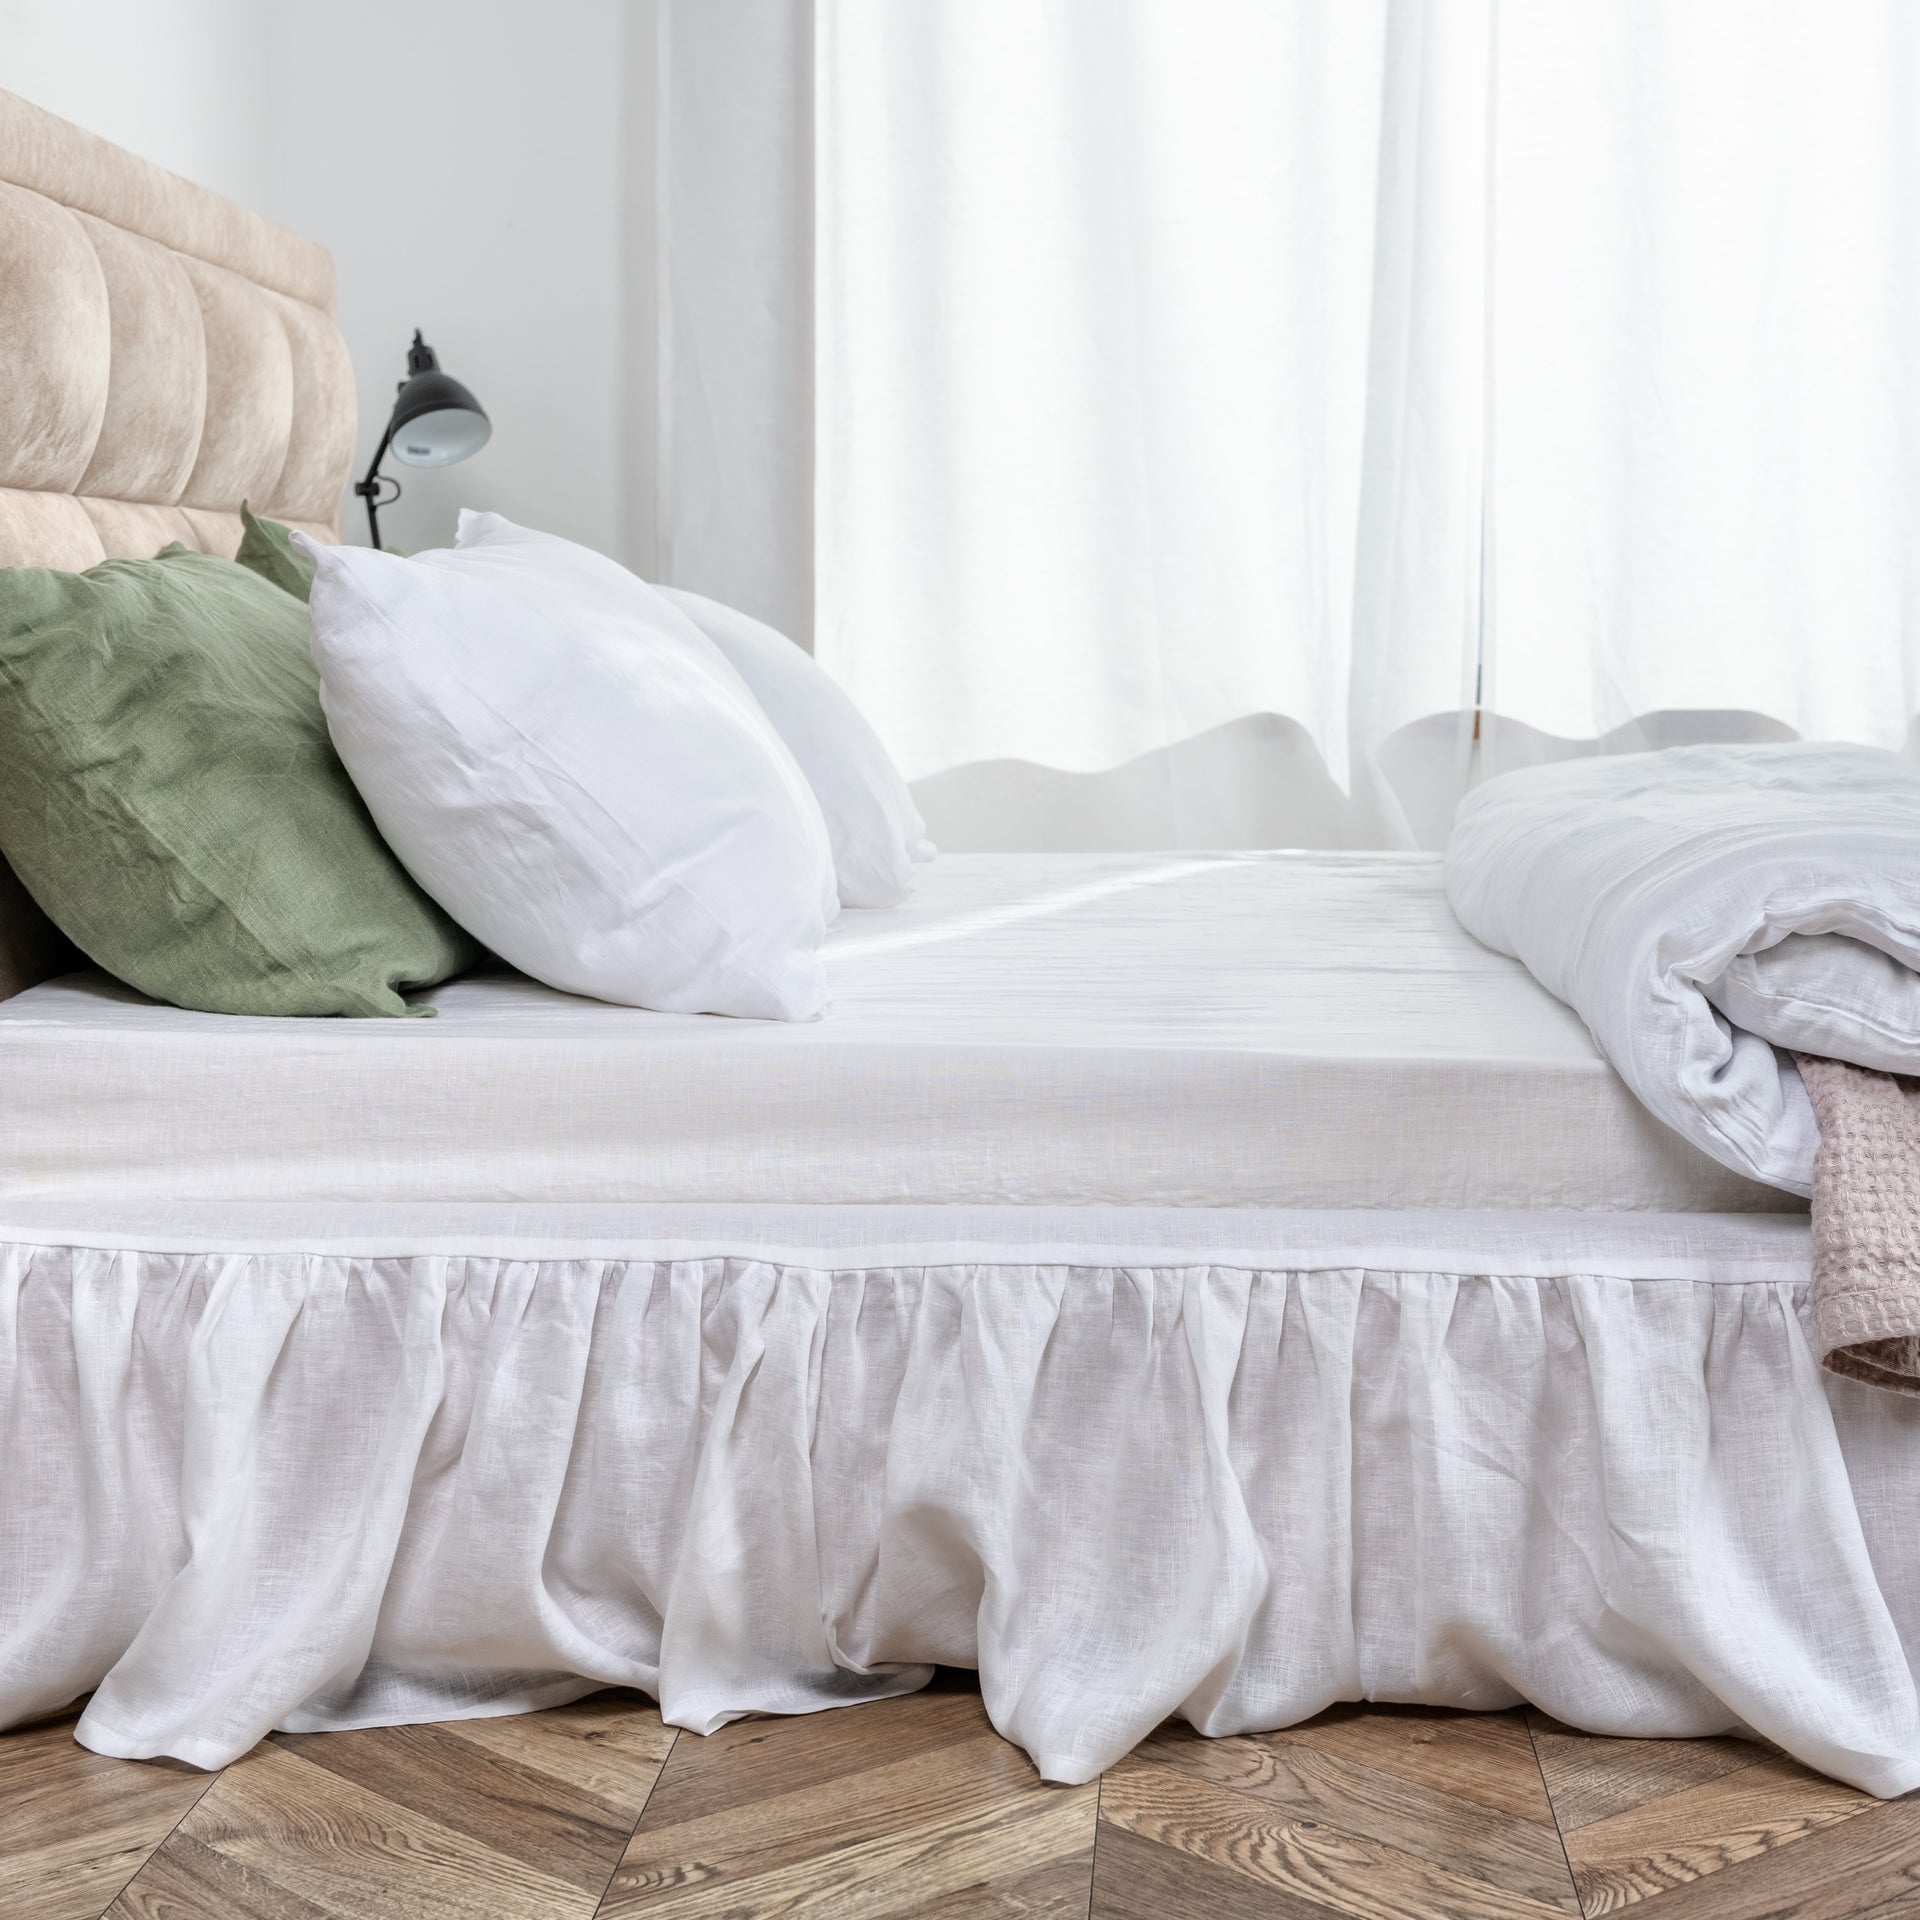 White Linen Bed Skirt with Gathered Ruffles and Cotton Decking - King